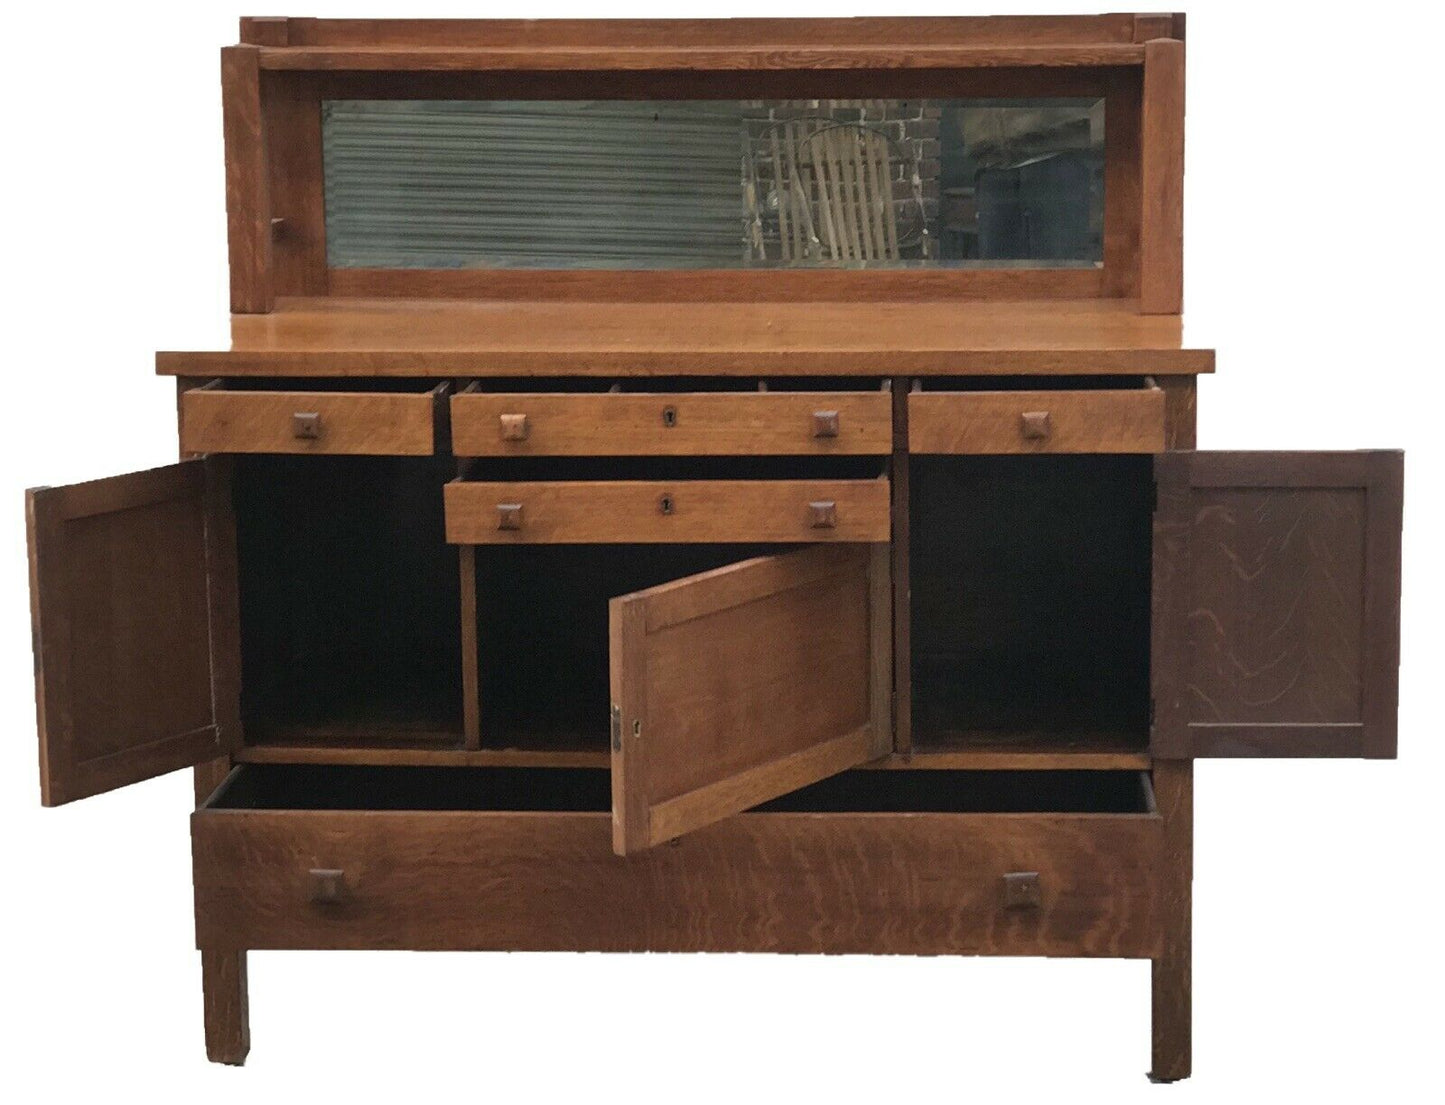 EARLY 20TH C. STICKLEY ARTS & CRAFTS / MISSION OAK SIDEBOARD W/ MIRRORED GALLERY